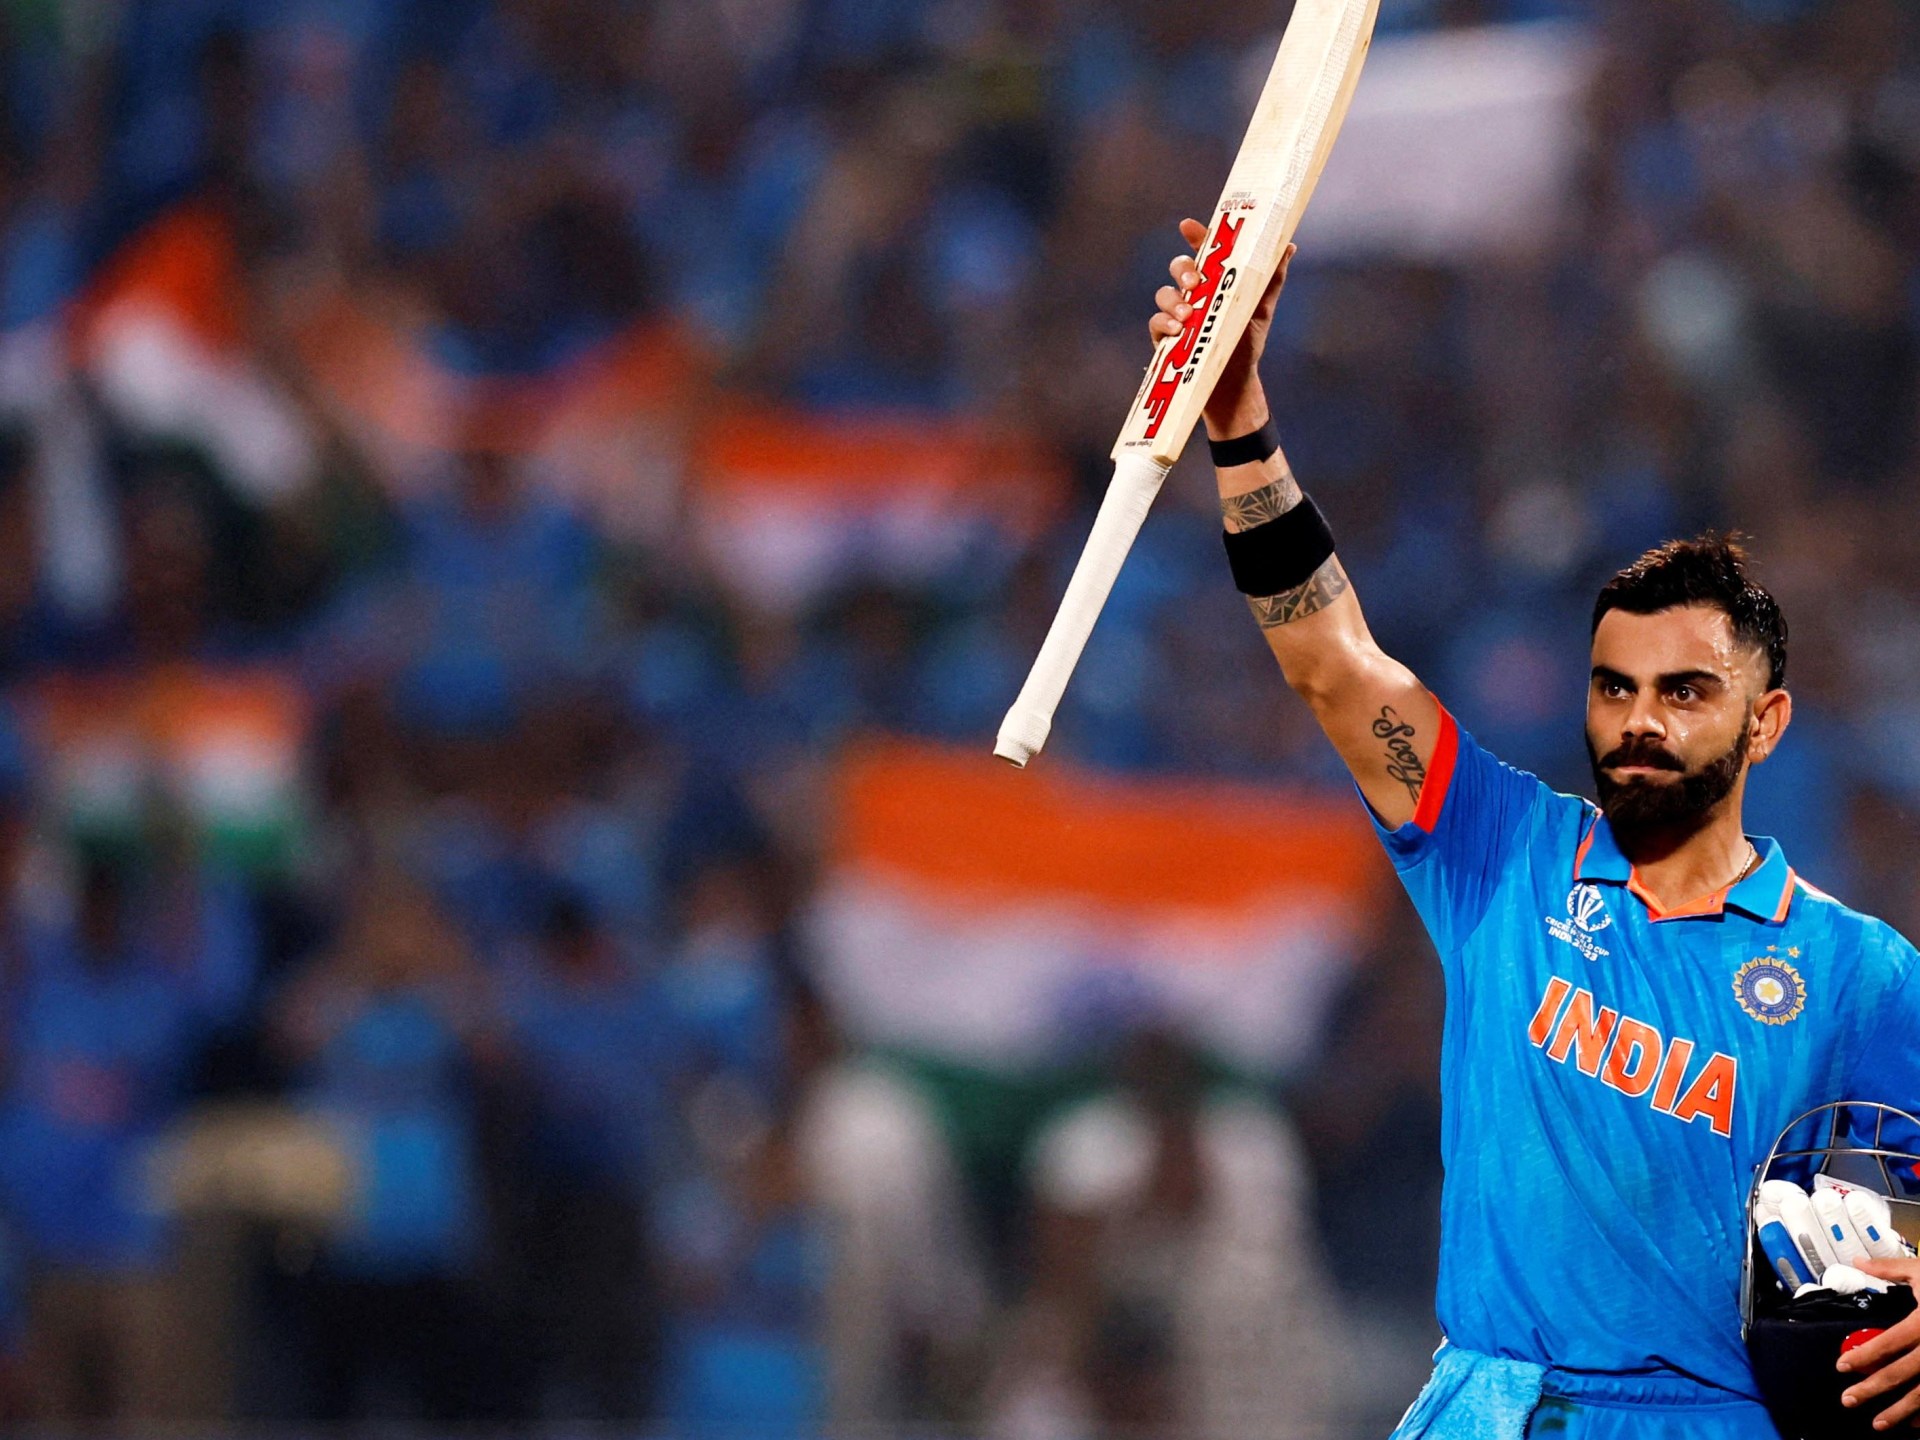 India’s ‘visionary’: Virat Kohli’s huge influence, in cricket and beyond